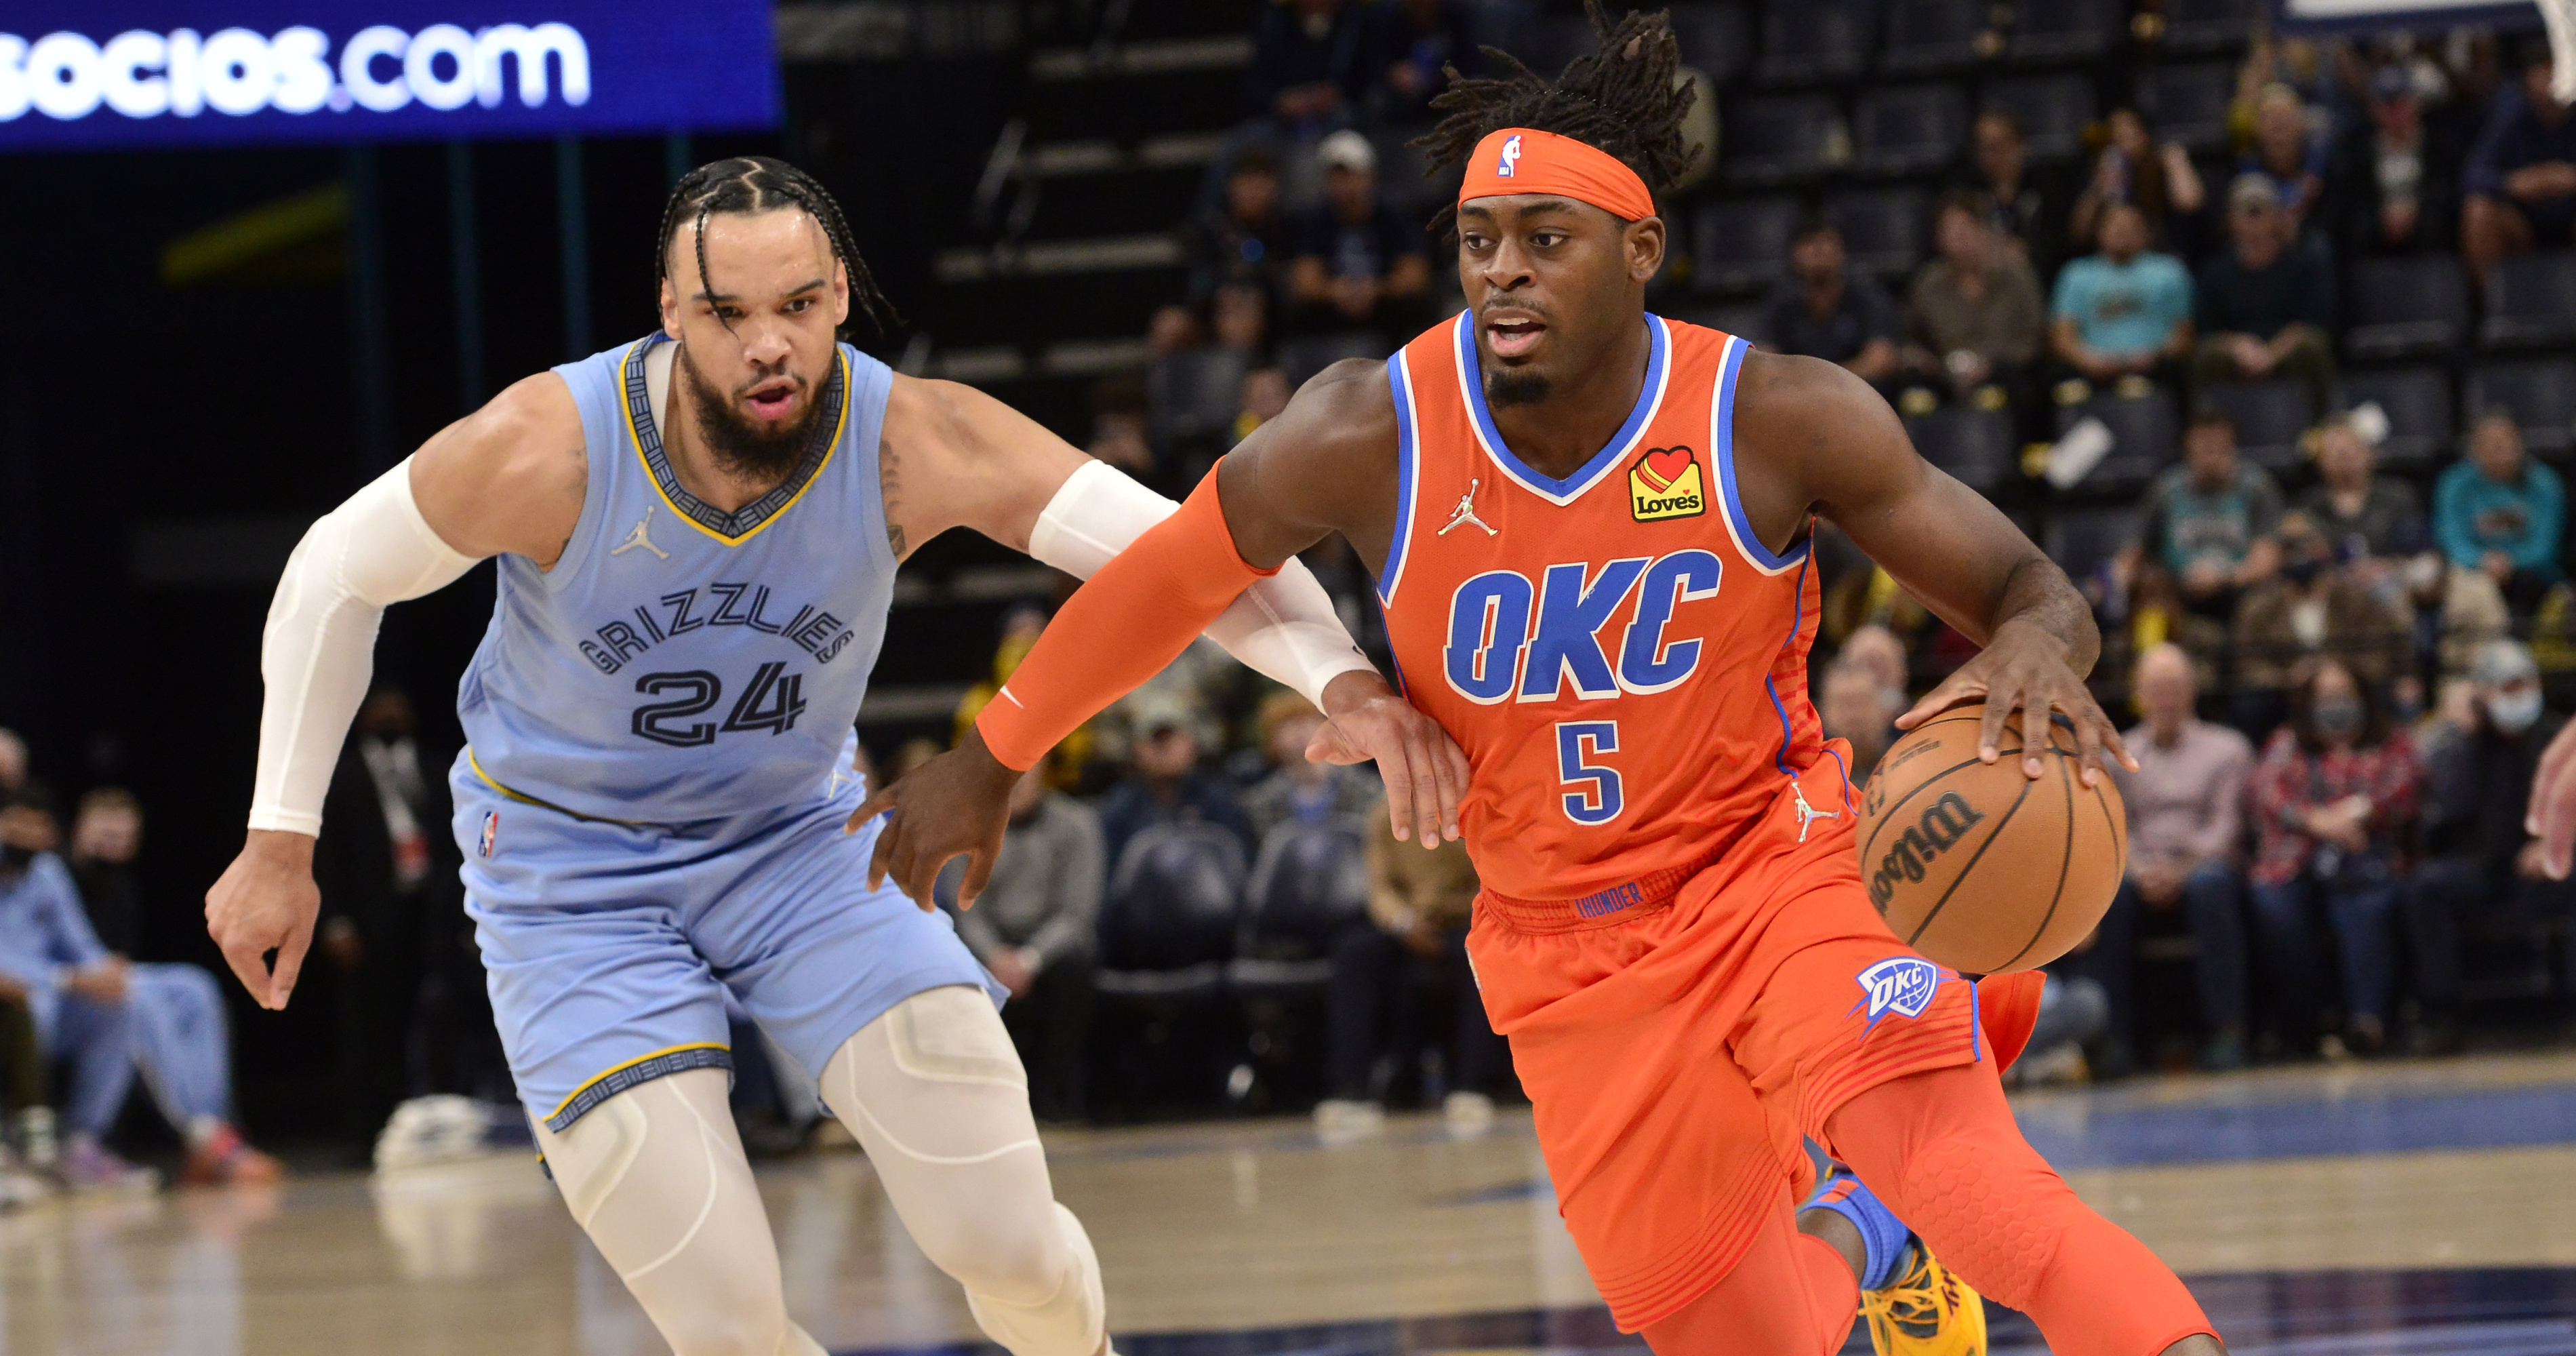 Grizzlies lead for all but 25 seconds in win over Thunder